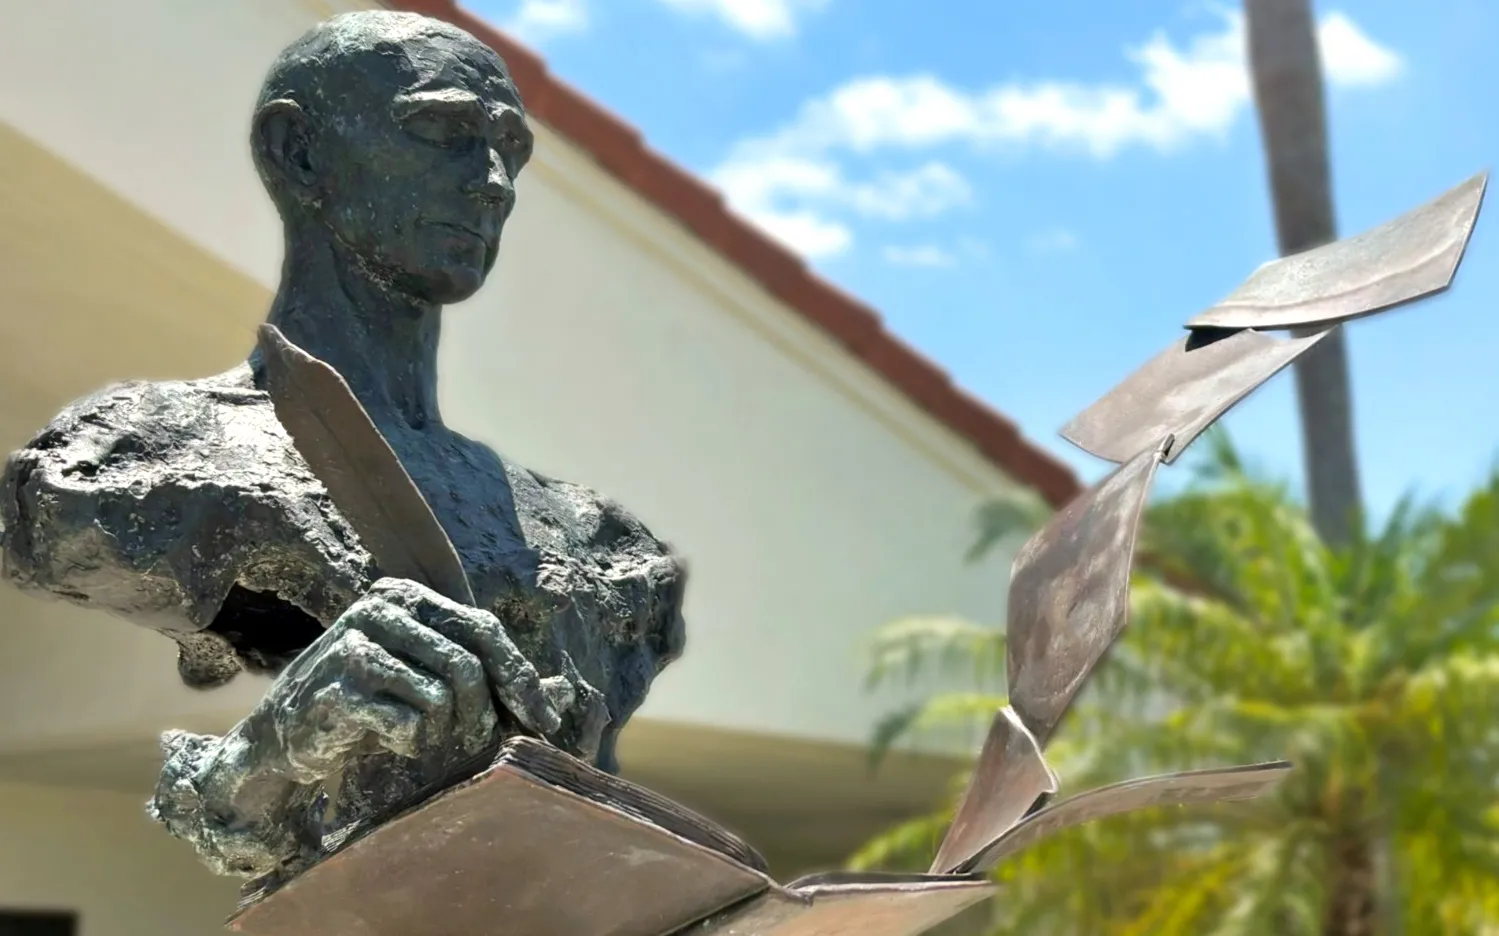 A statue titled "The Poet" located at the Hobe Sound Library